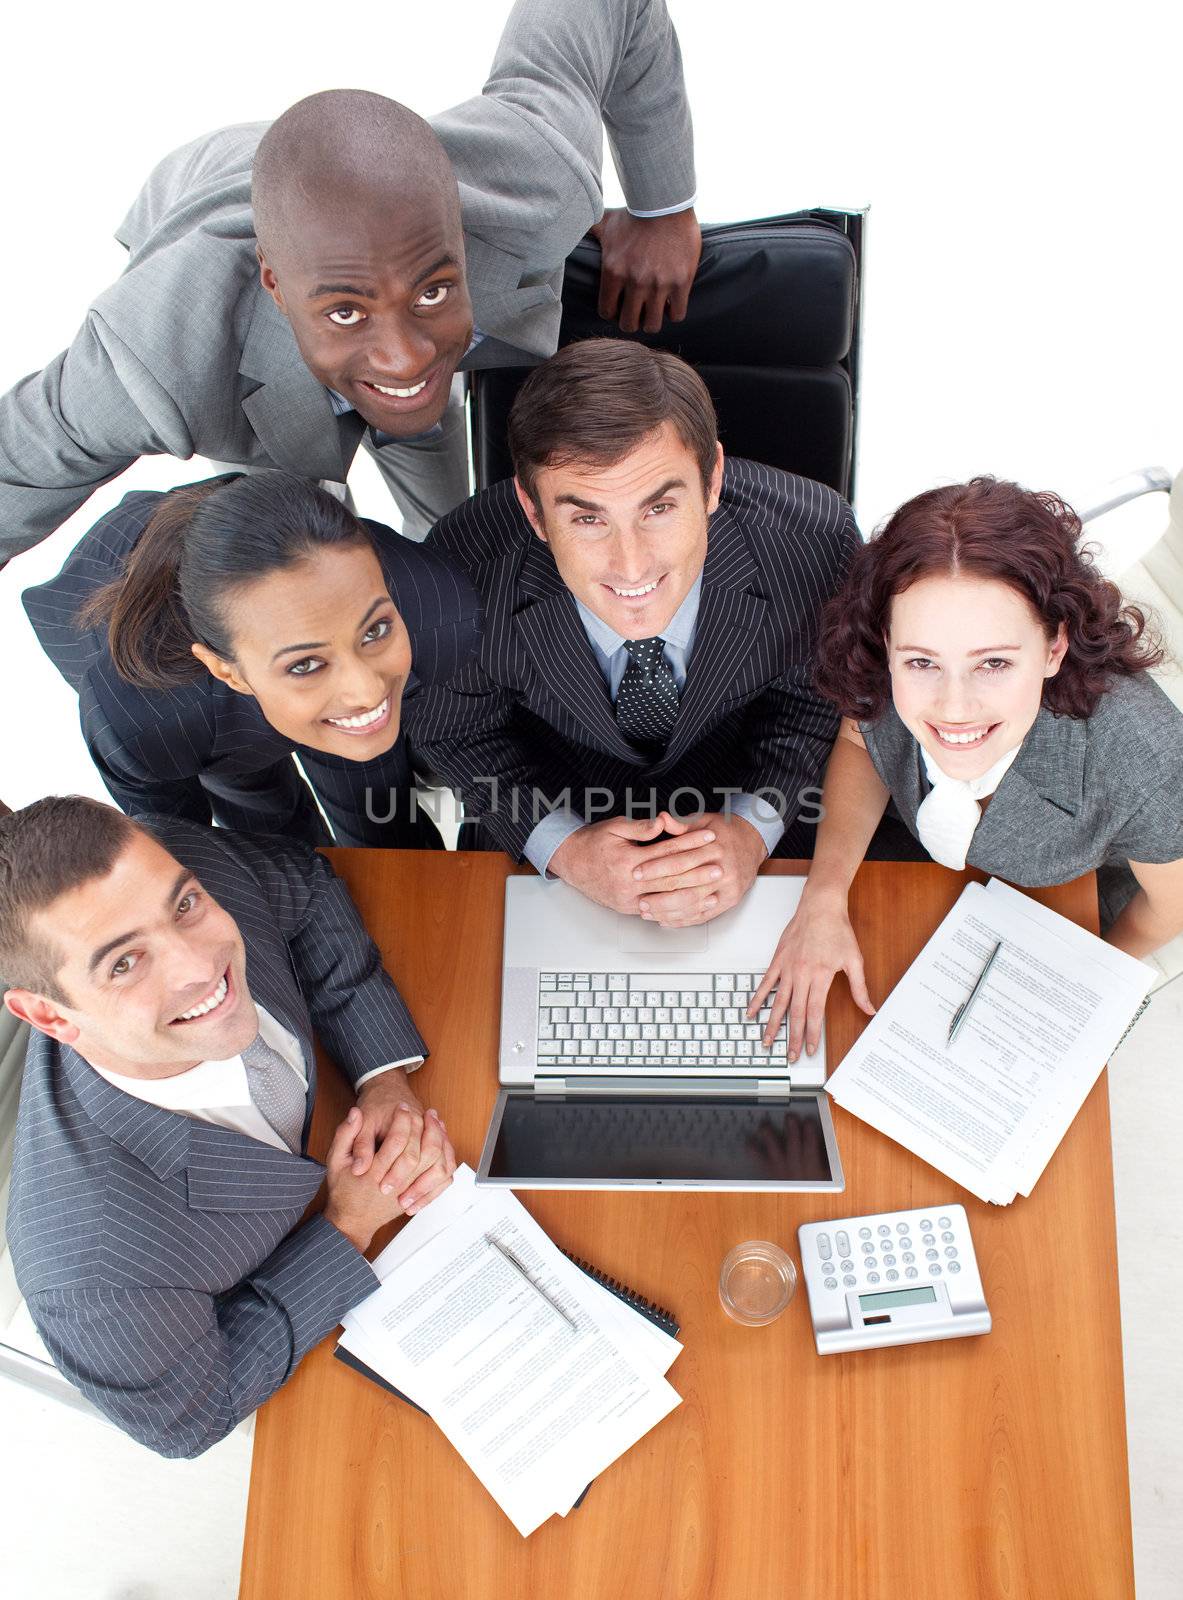 HIgh angle of business people working together with a laptop